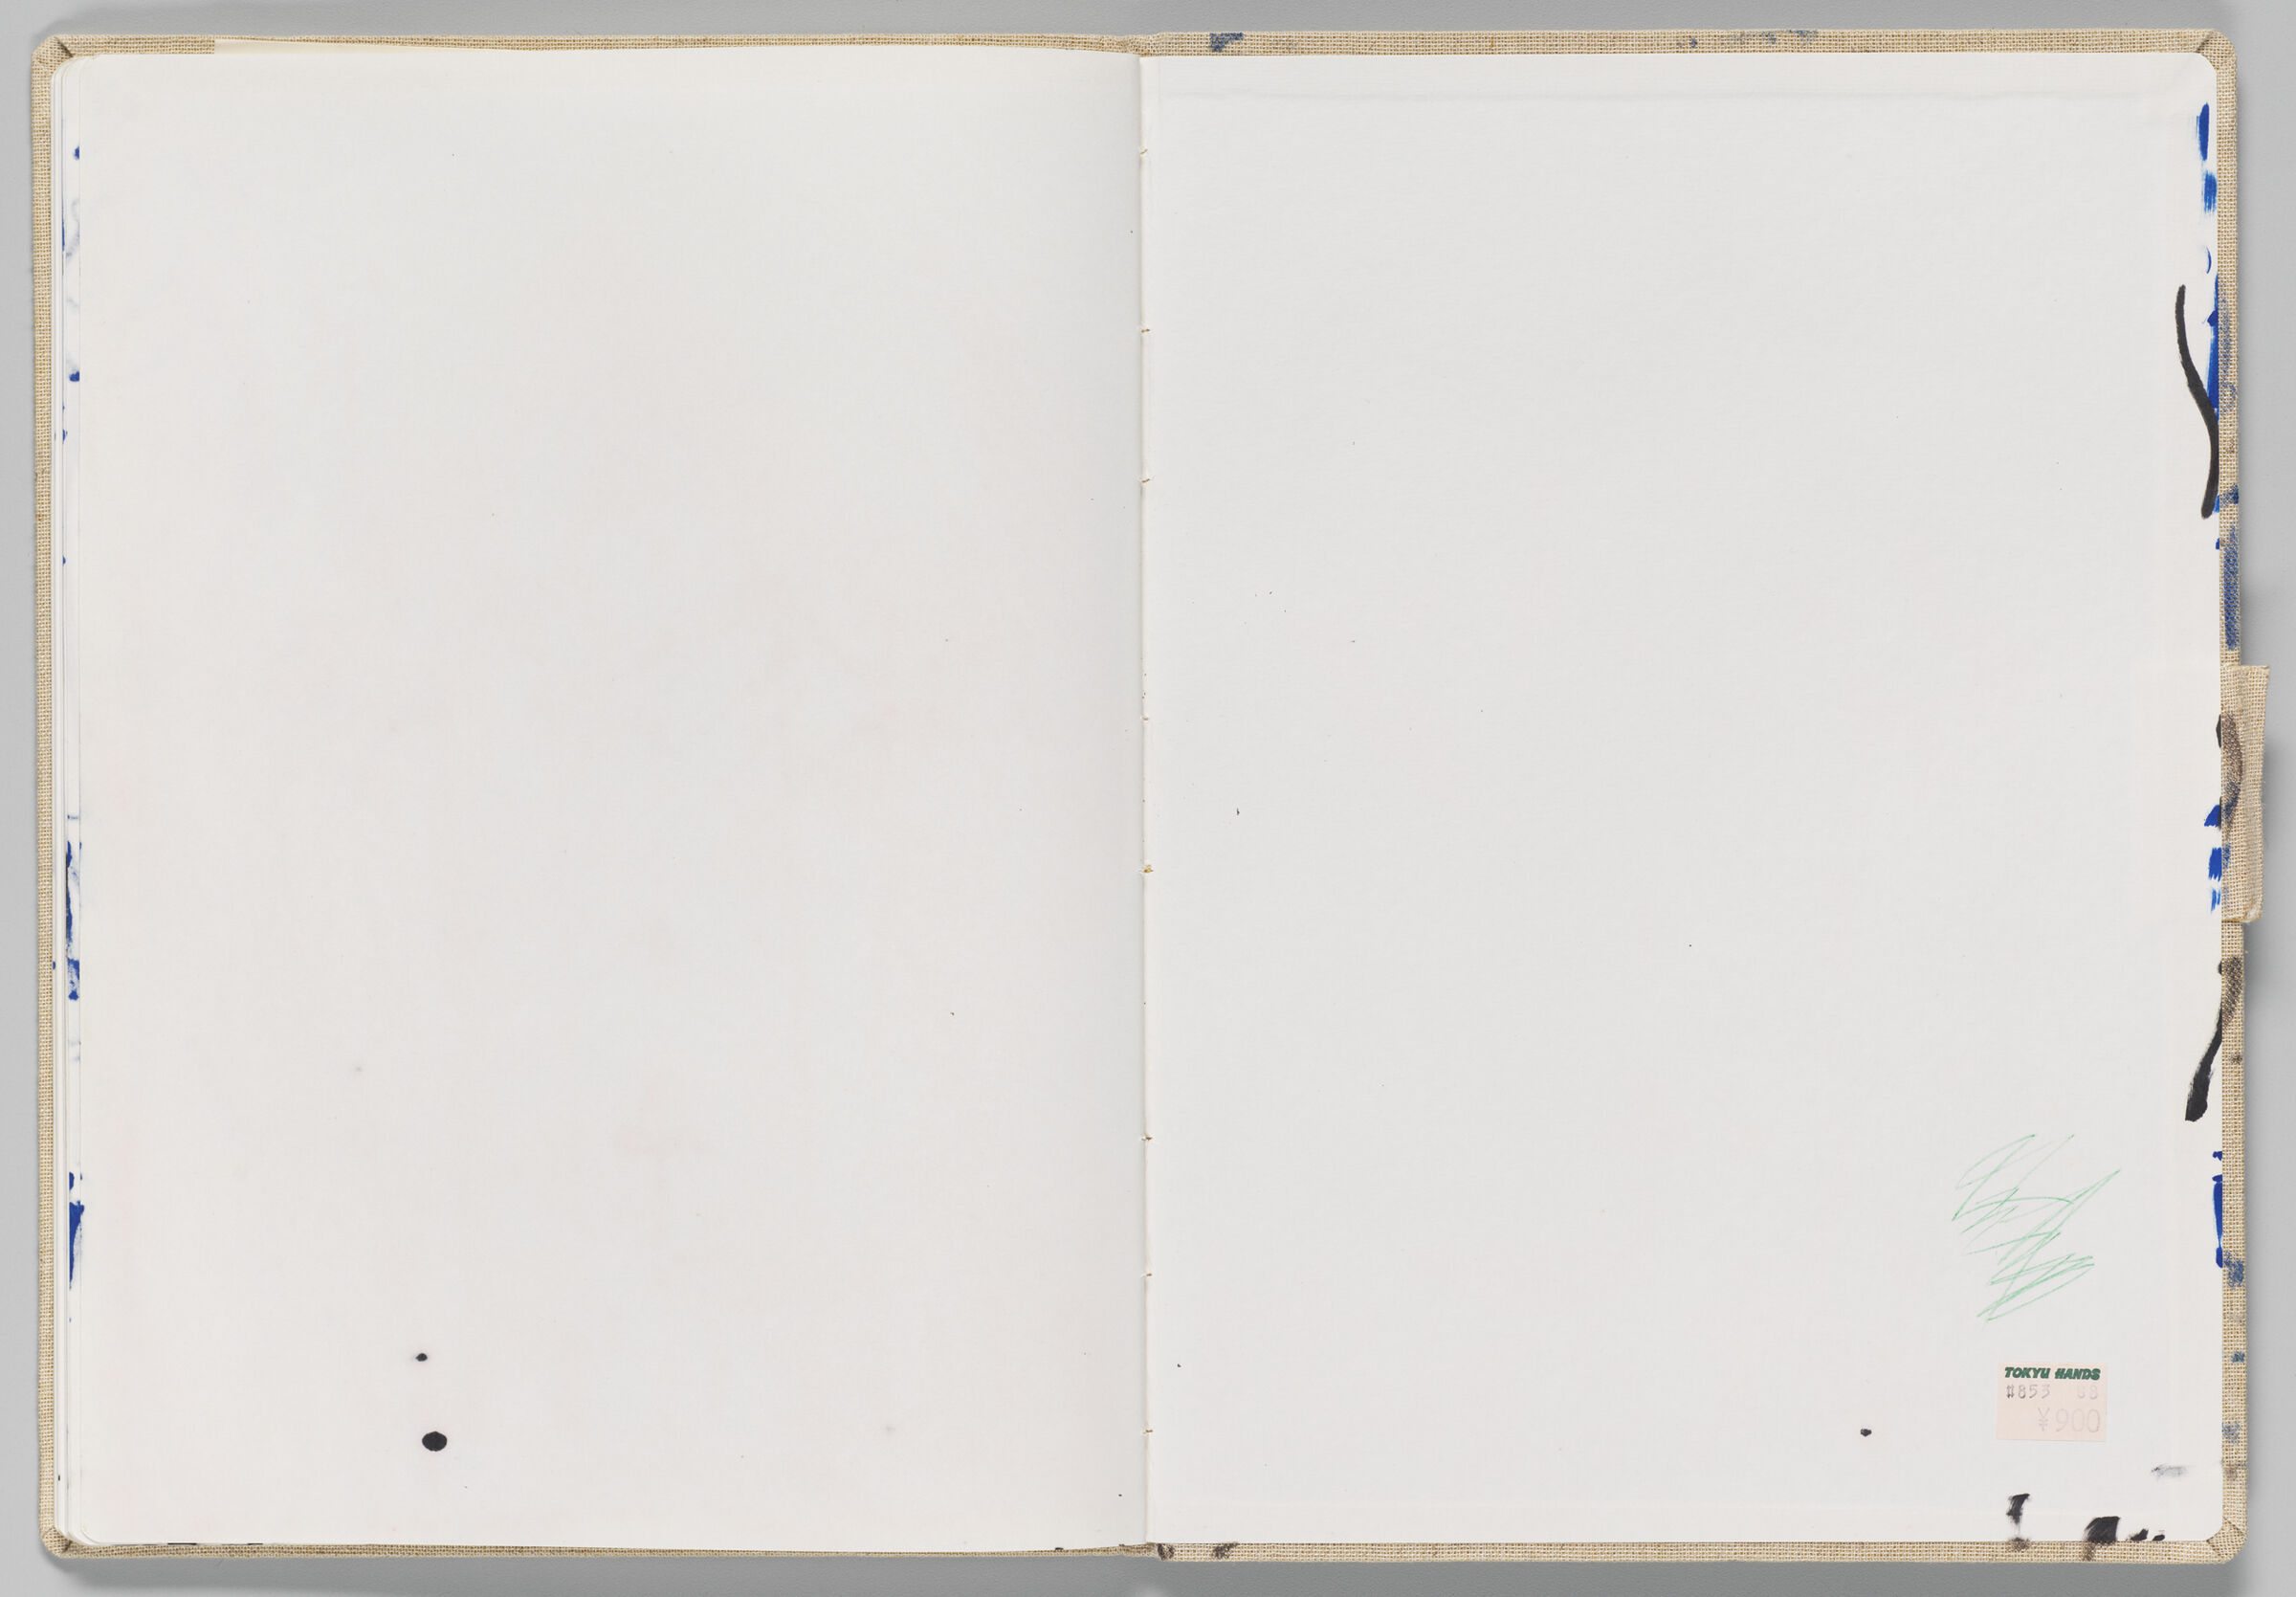 Untitled (Blank With Stray Marks, Left Page); Untitled (Blank Back Endpaper With Stray Marks, Right Page)